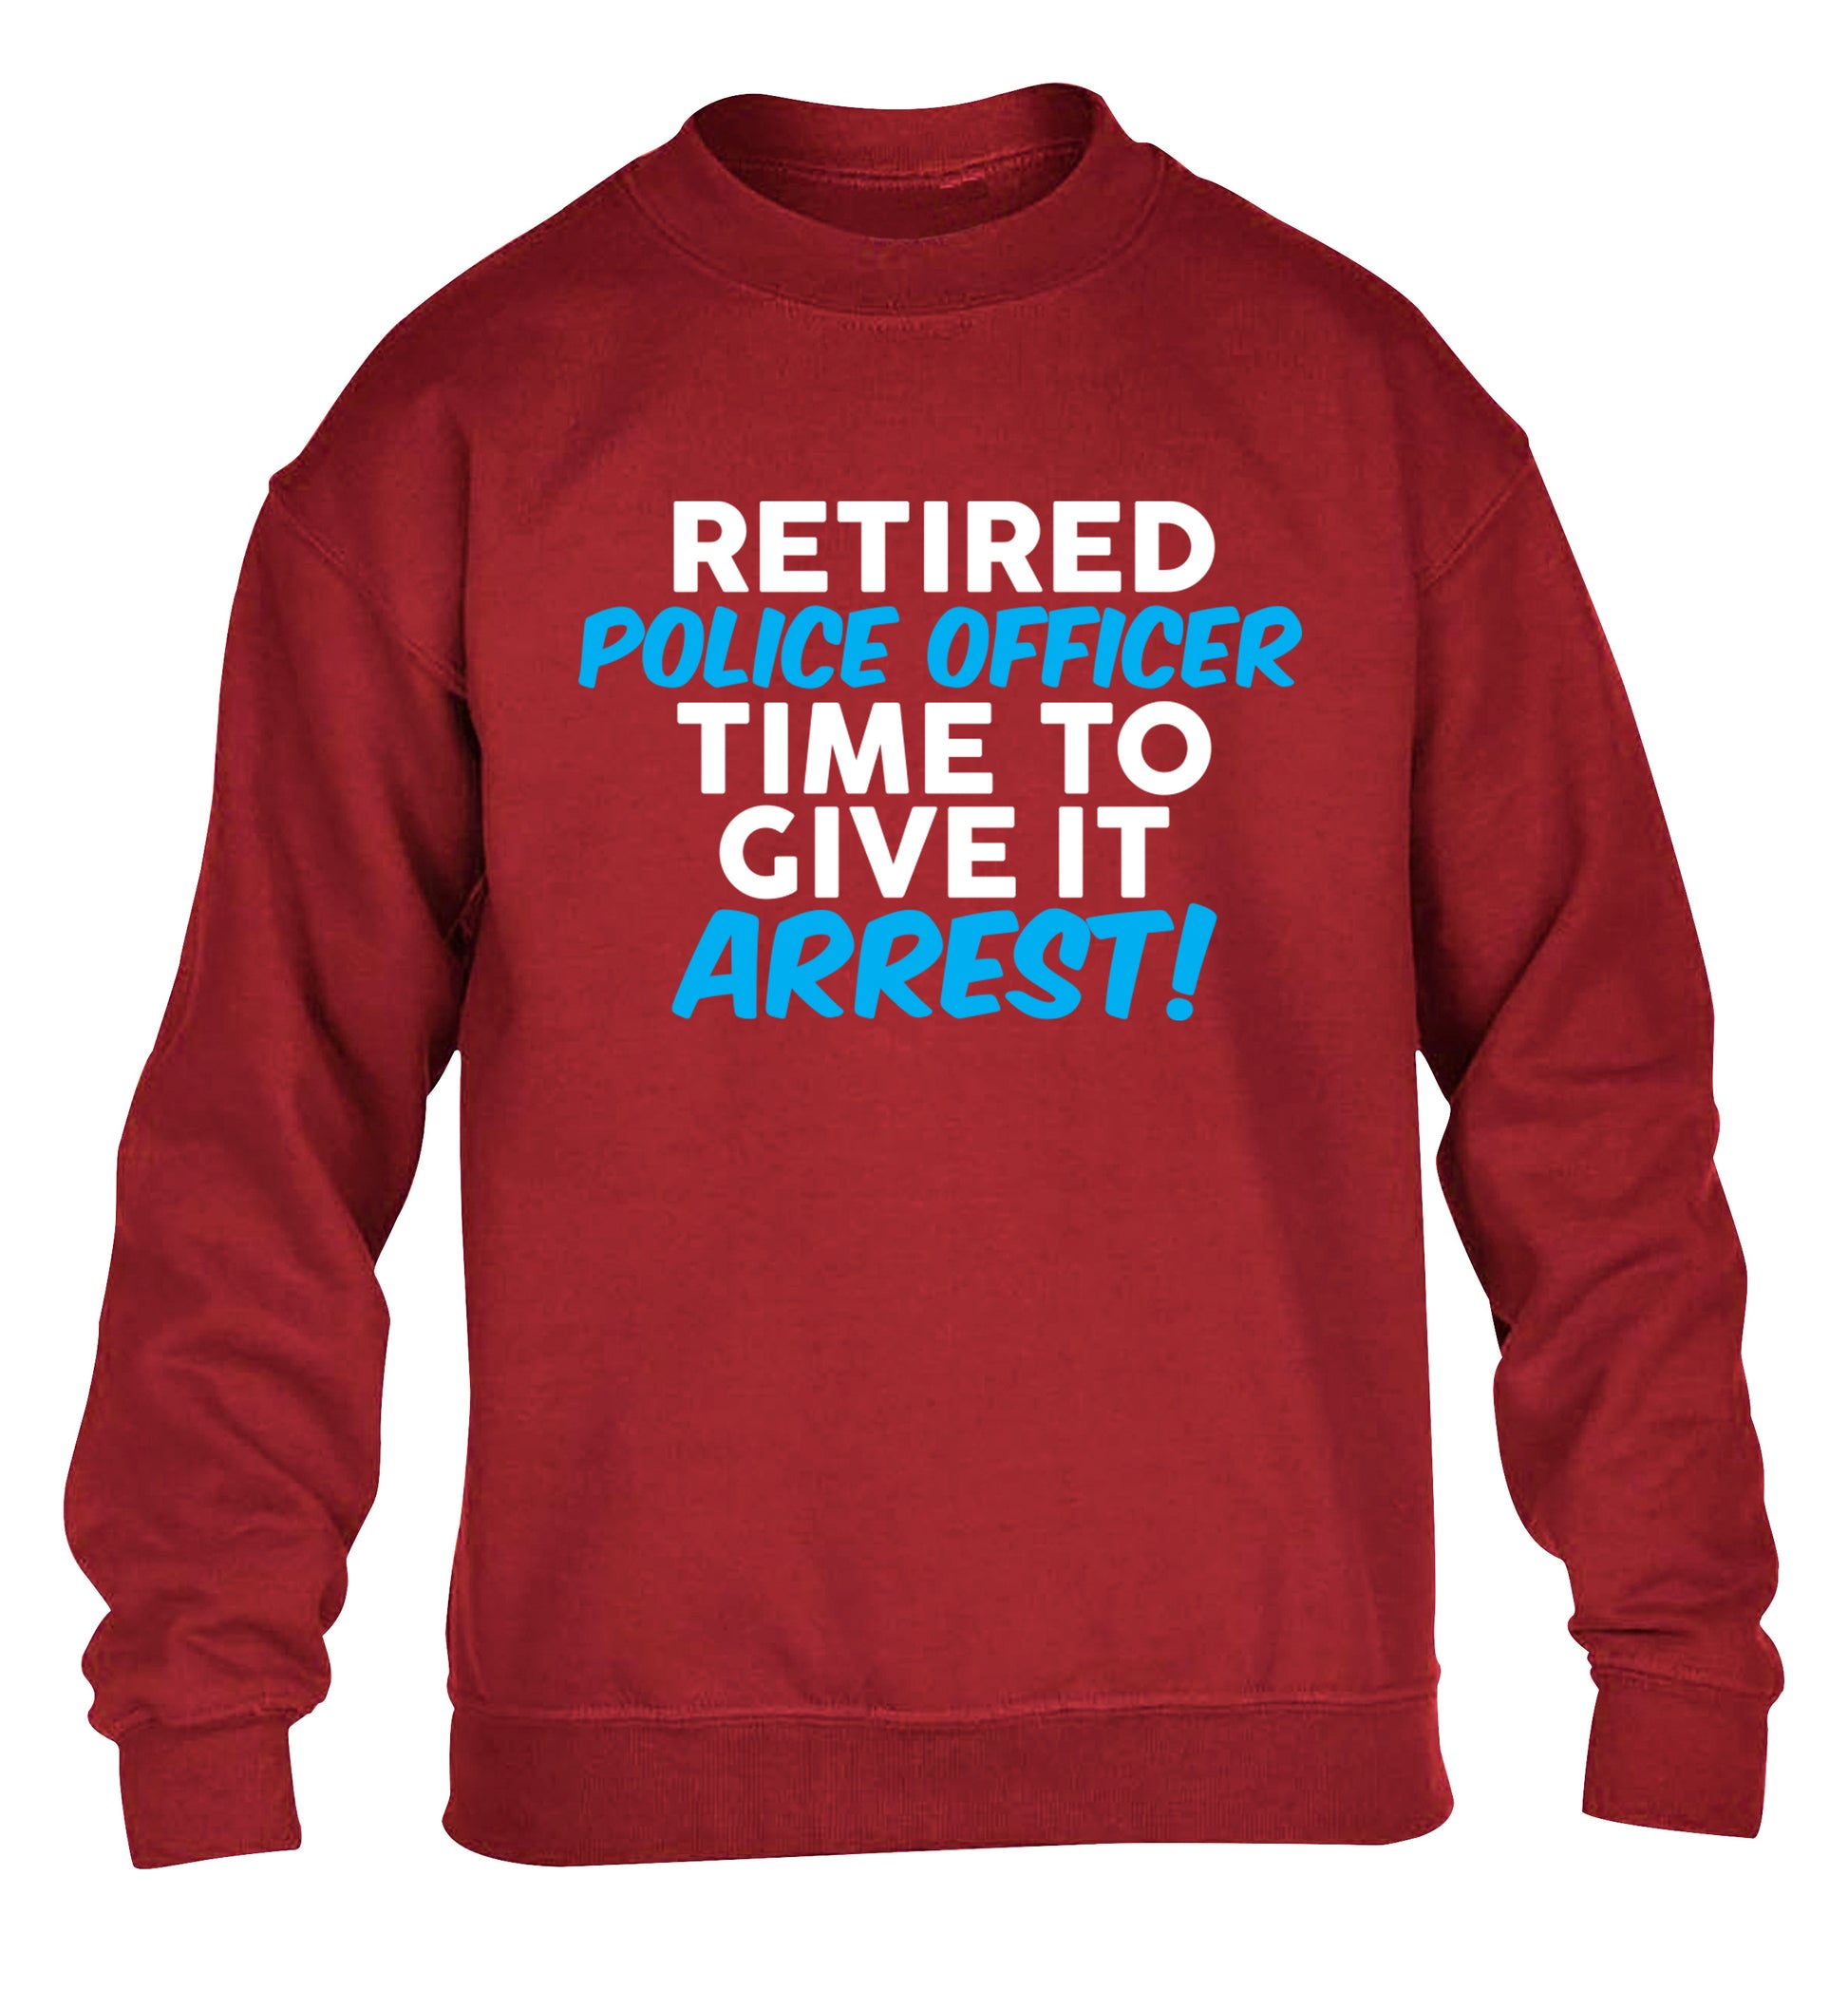 Retired police officer time to give it arrest children's grey sweater 12-13 Years